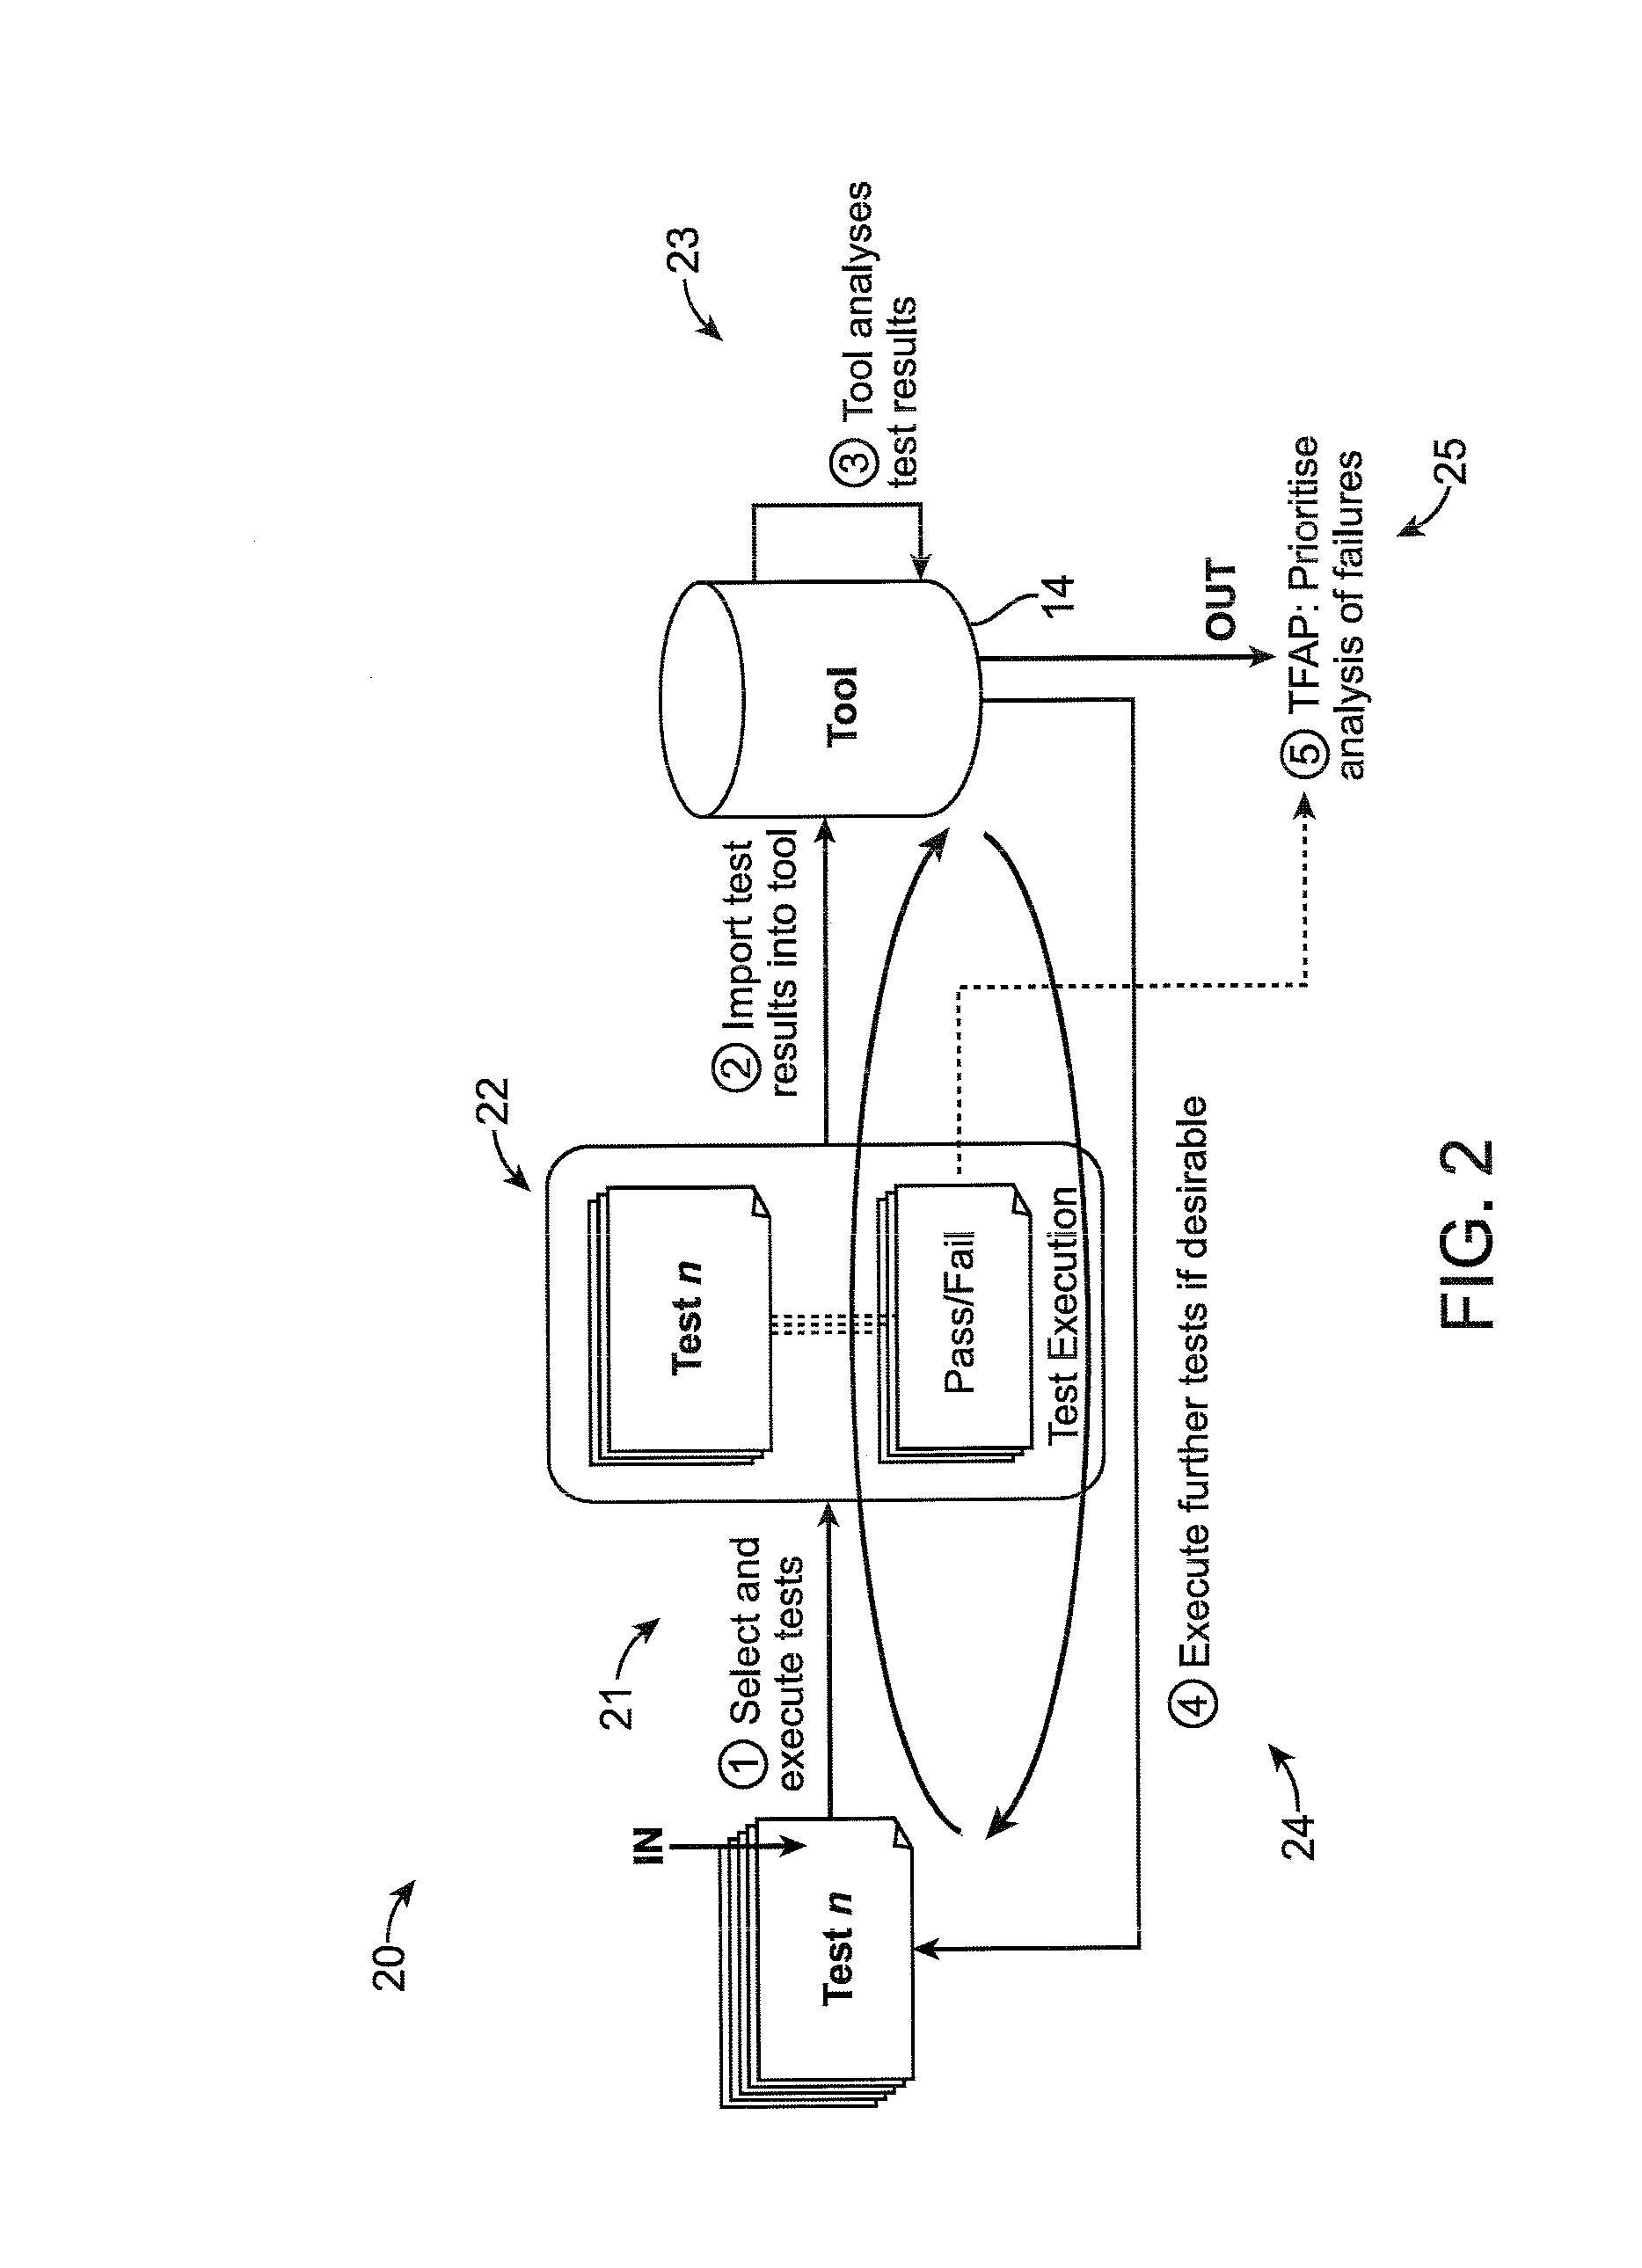 Method and system for test failure analysis prioritization for software code testing in automated test execution